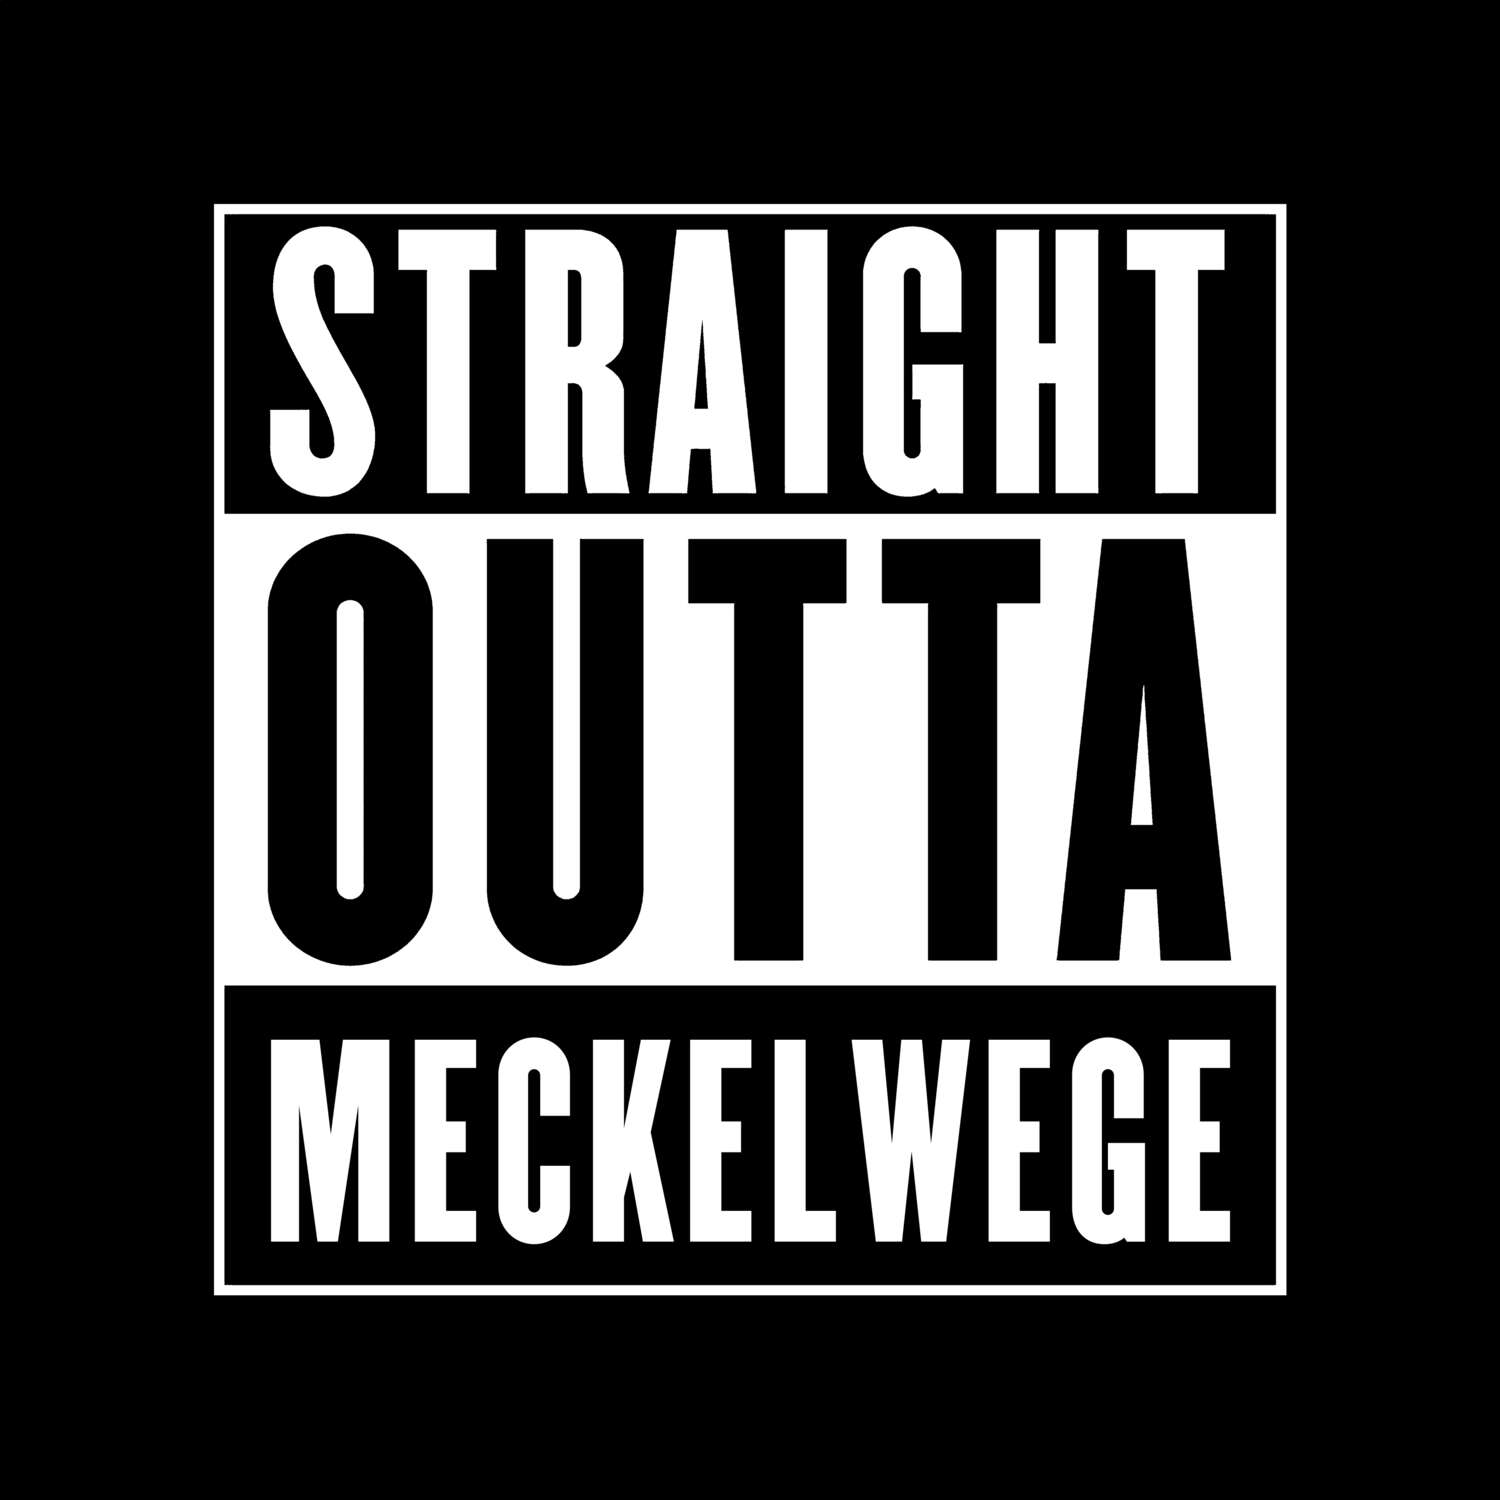 Meckelwege T-Shirt »Straight Outta«